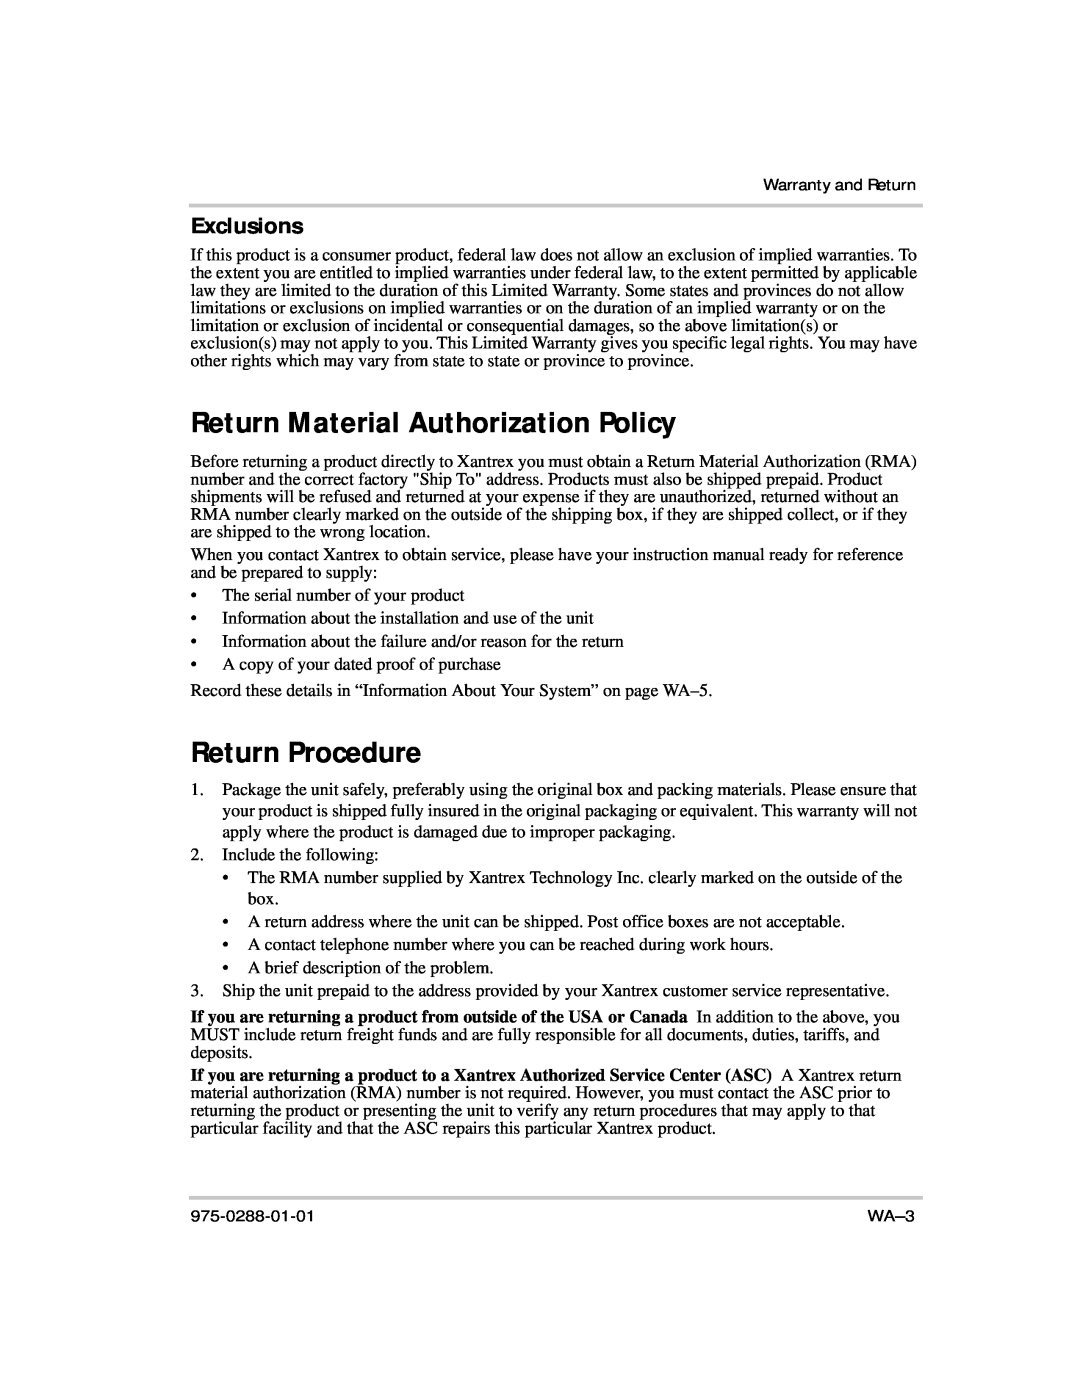 Xantrex Technology PH1800 manual Return Material Authorization Policy, Return Procedure, Exclusions 